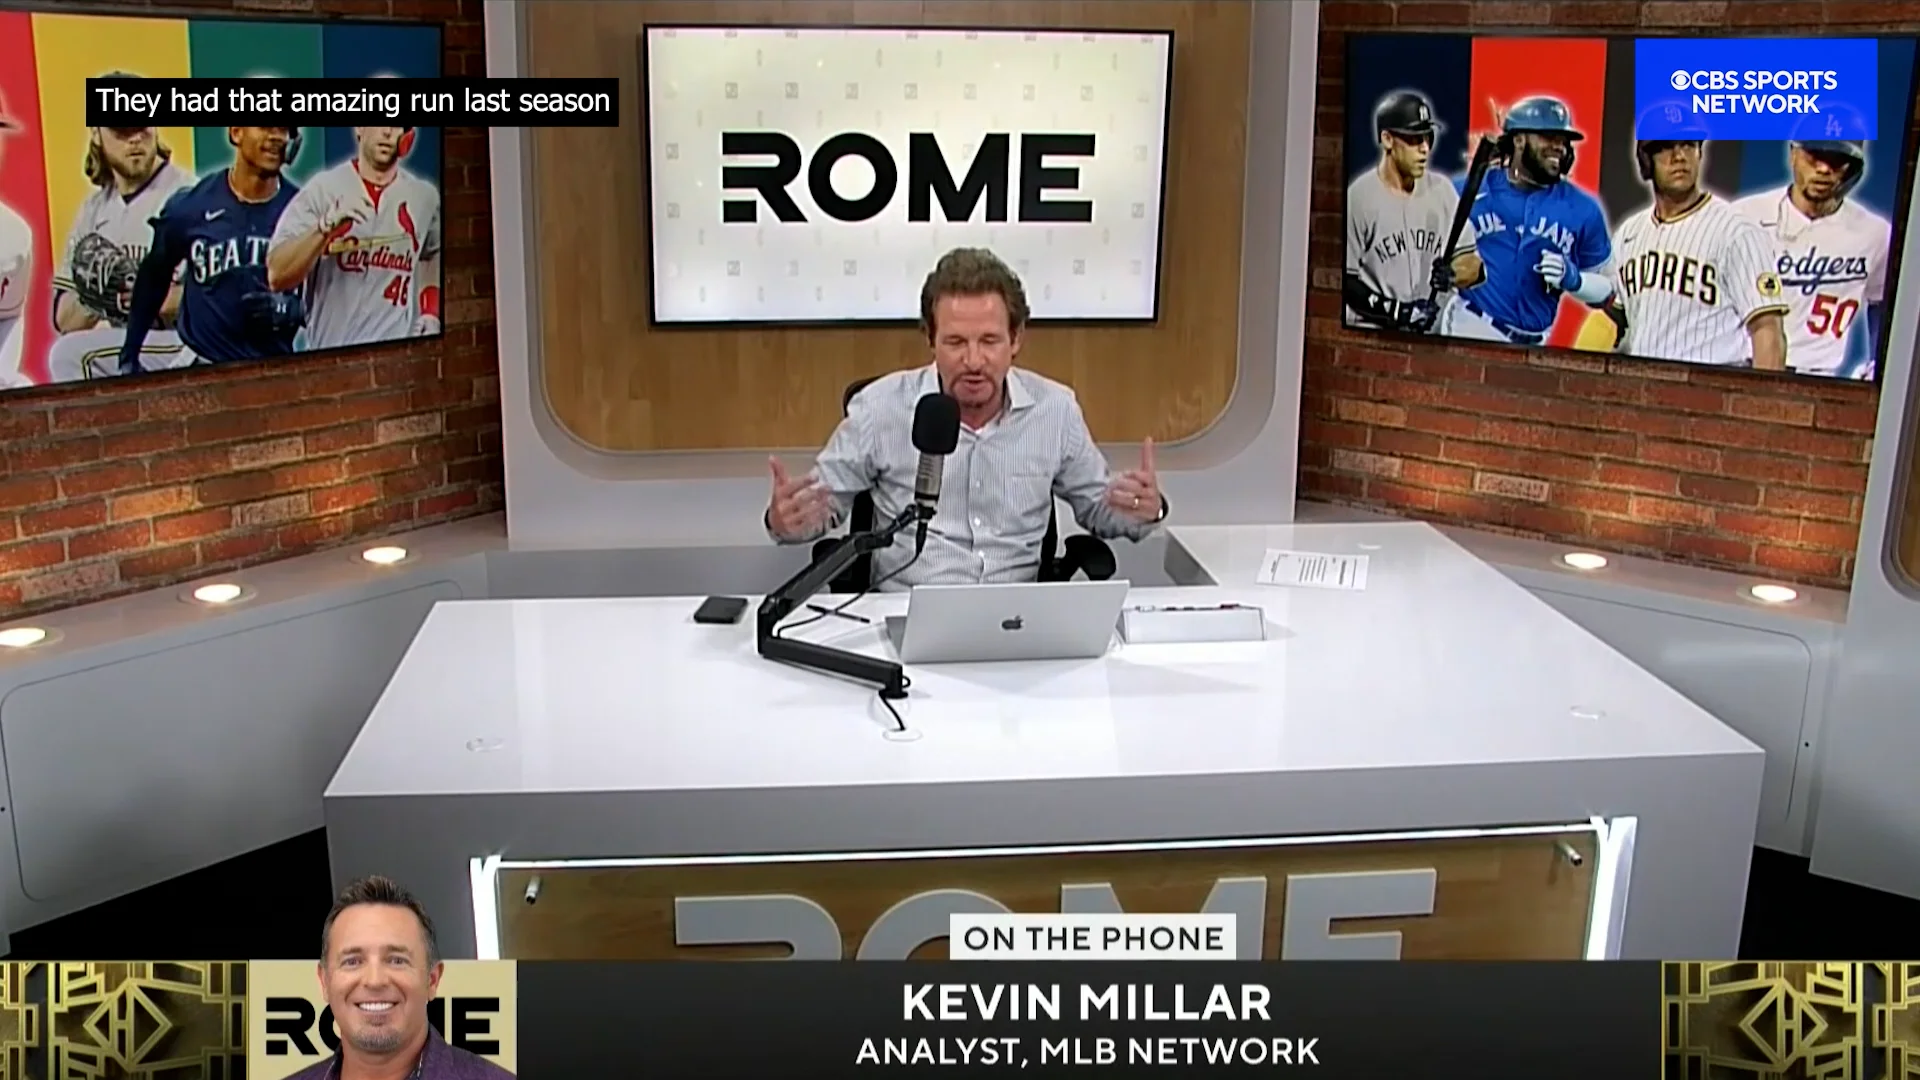 Kevin Millar on the Padres on Vimeo